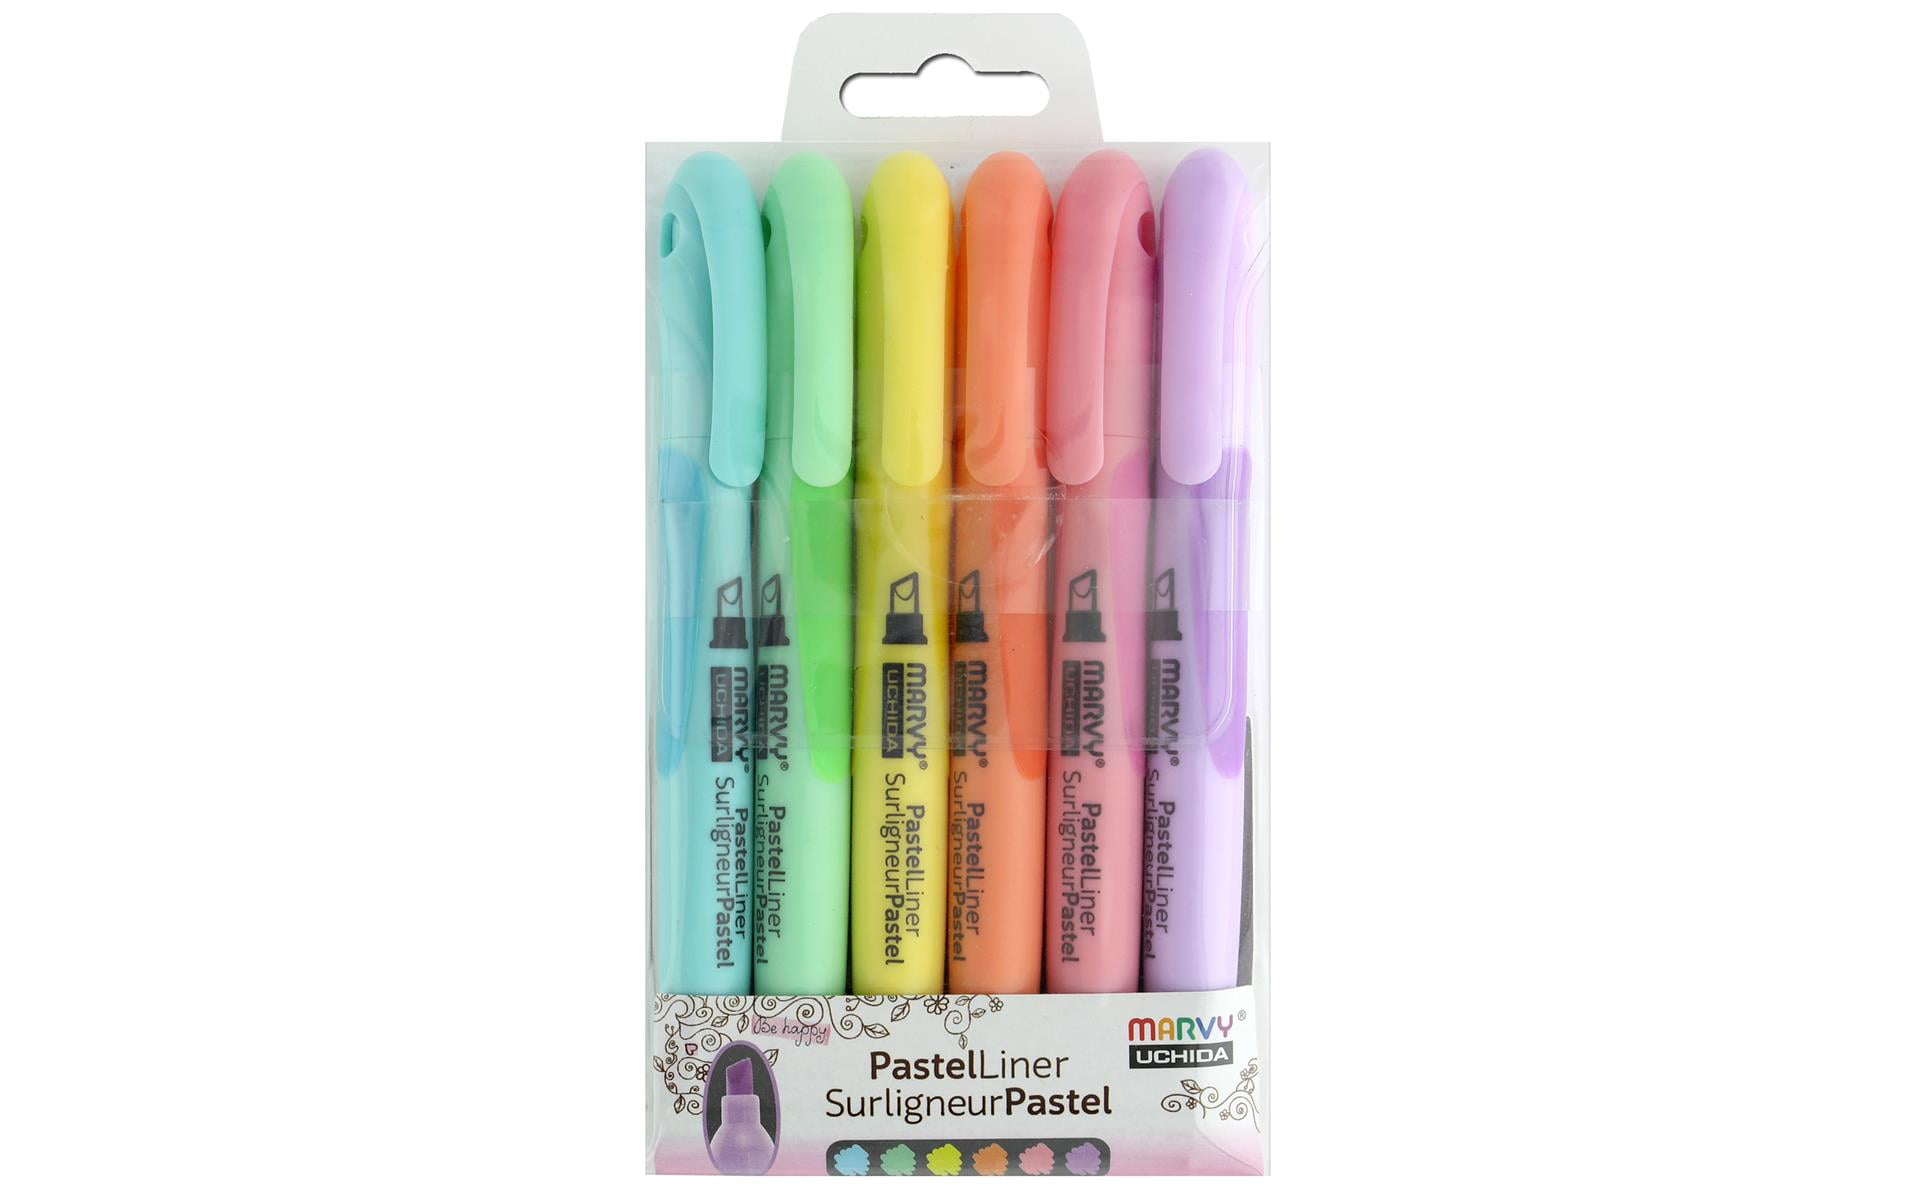 Tip, 6 Pastel Liner, Highlighters, 8000-6P Colors, Pc Assorted Set, Chisel Uchida Marvy